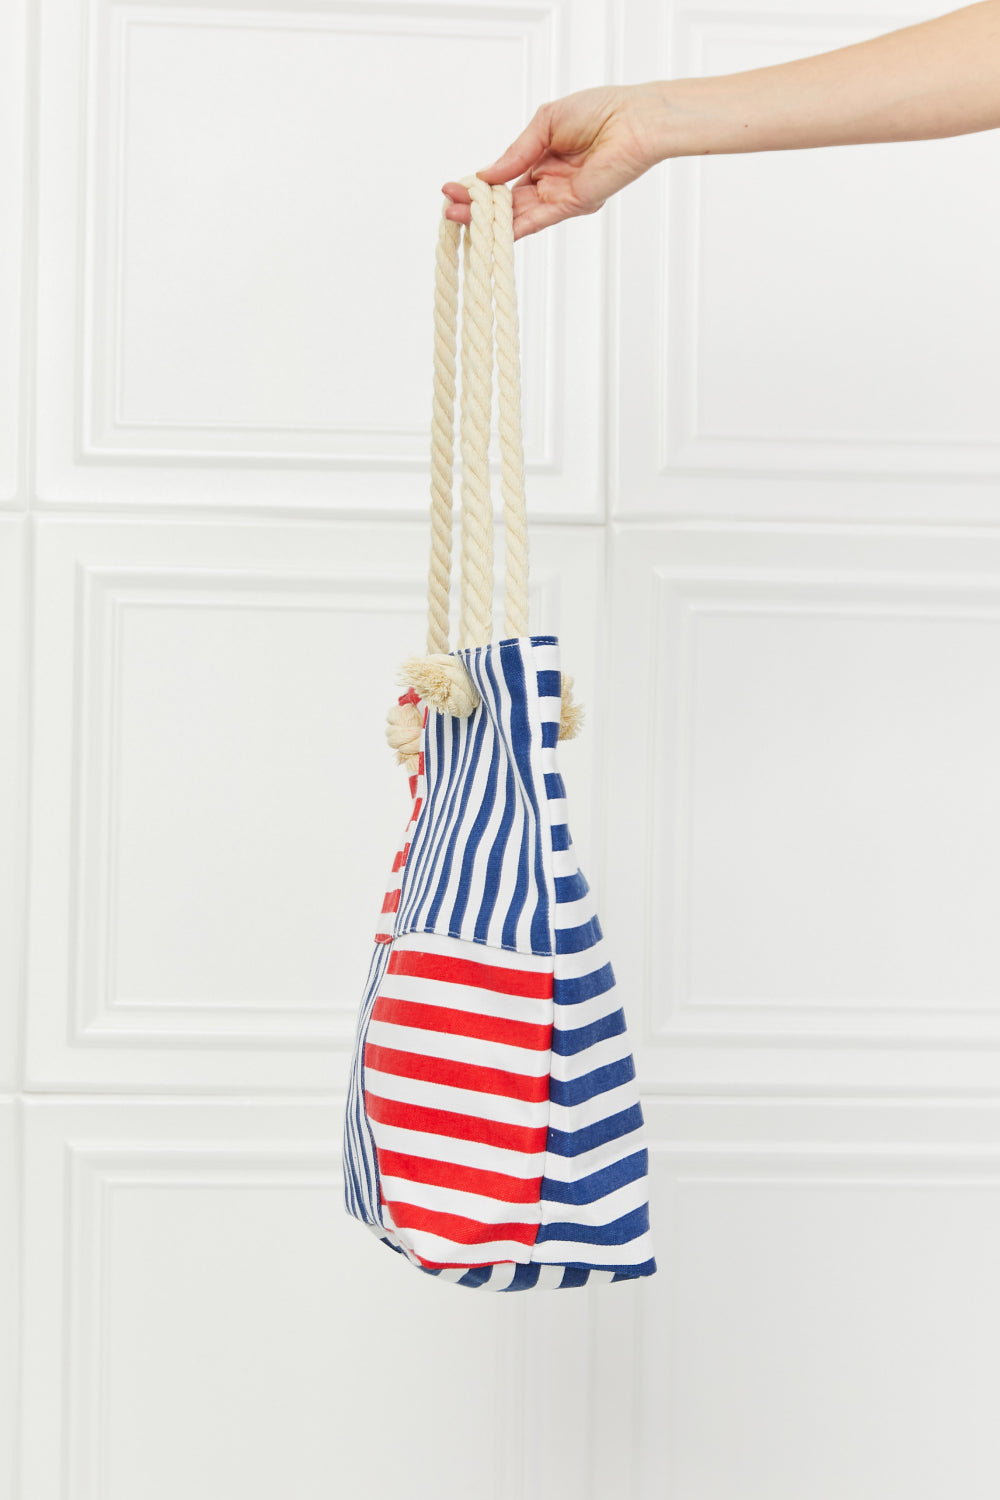 I'm All In Red White and Blue Striped Tote Bag-Tote Bag-PureDesignTees